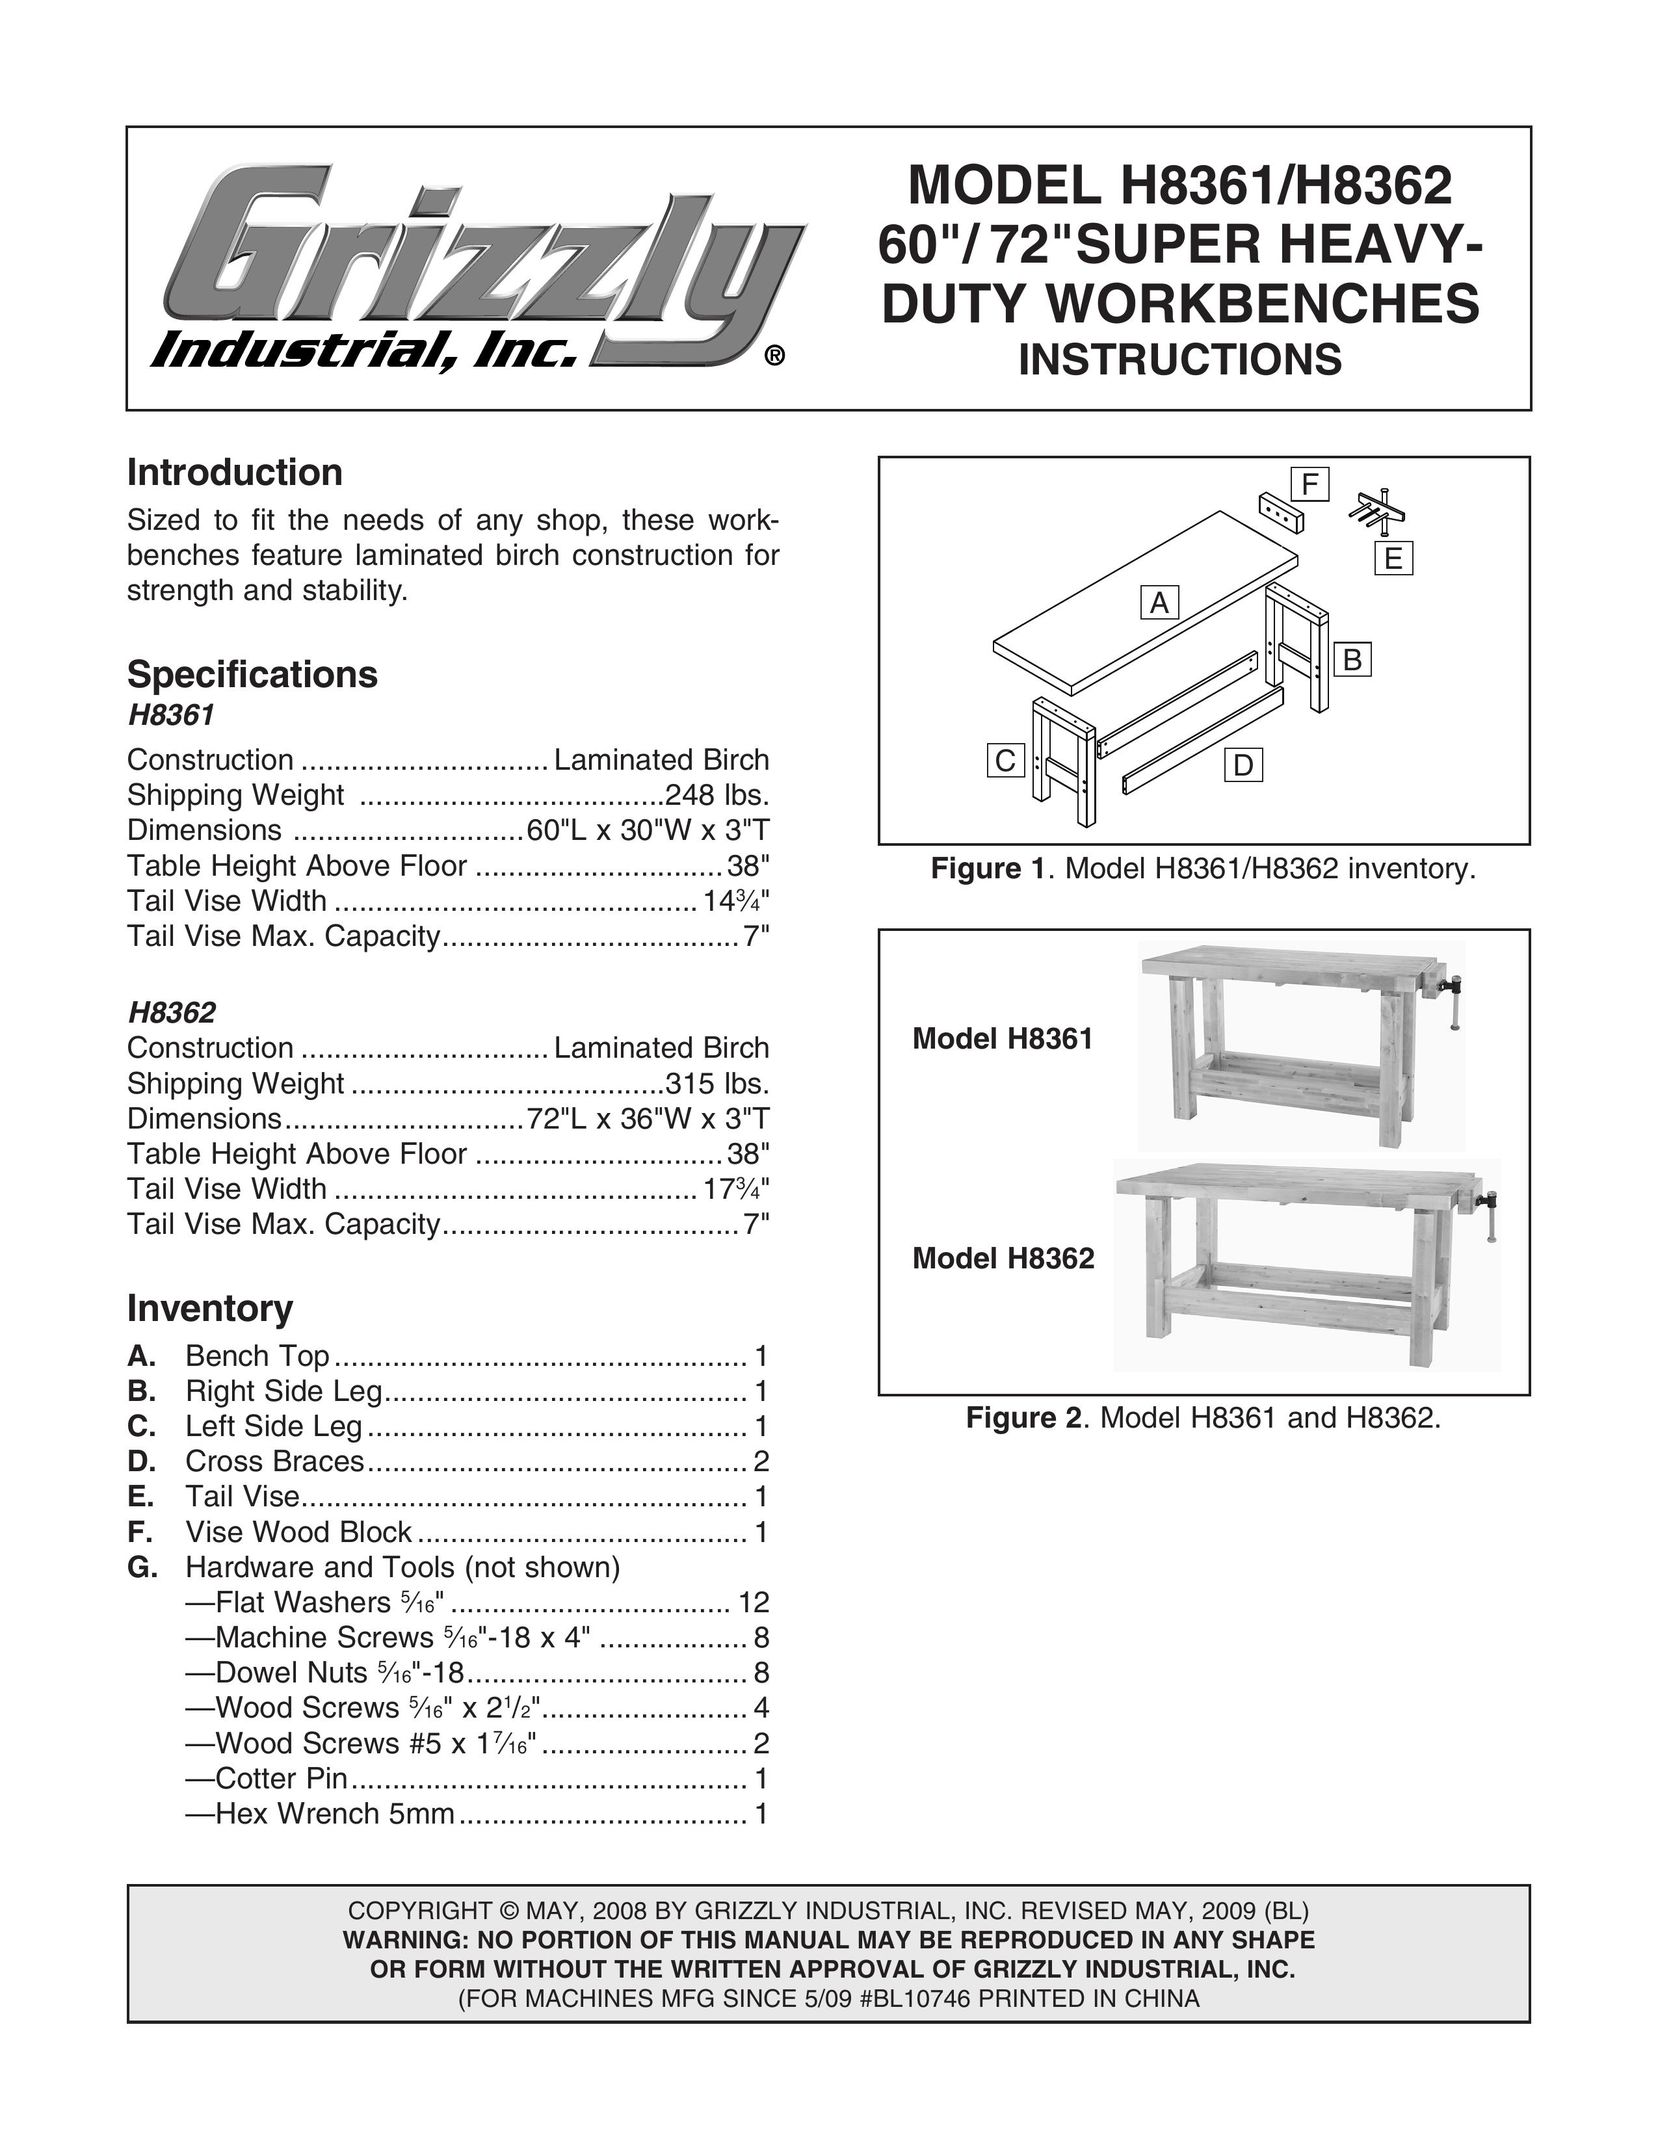 Grizzly H8361 Biscuit Joiner User Manual